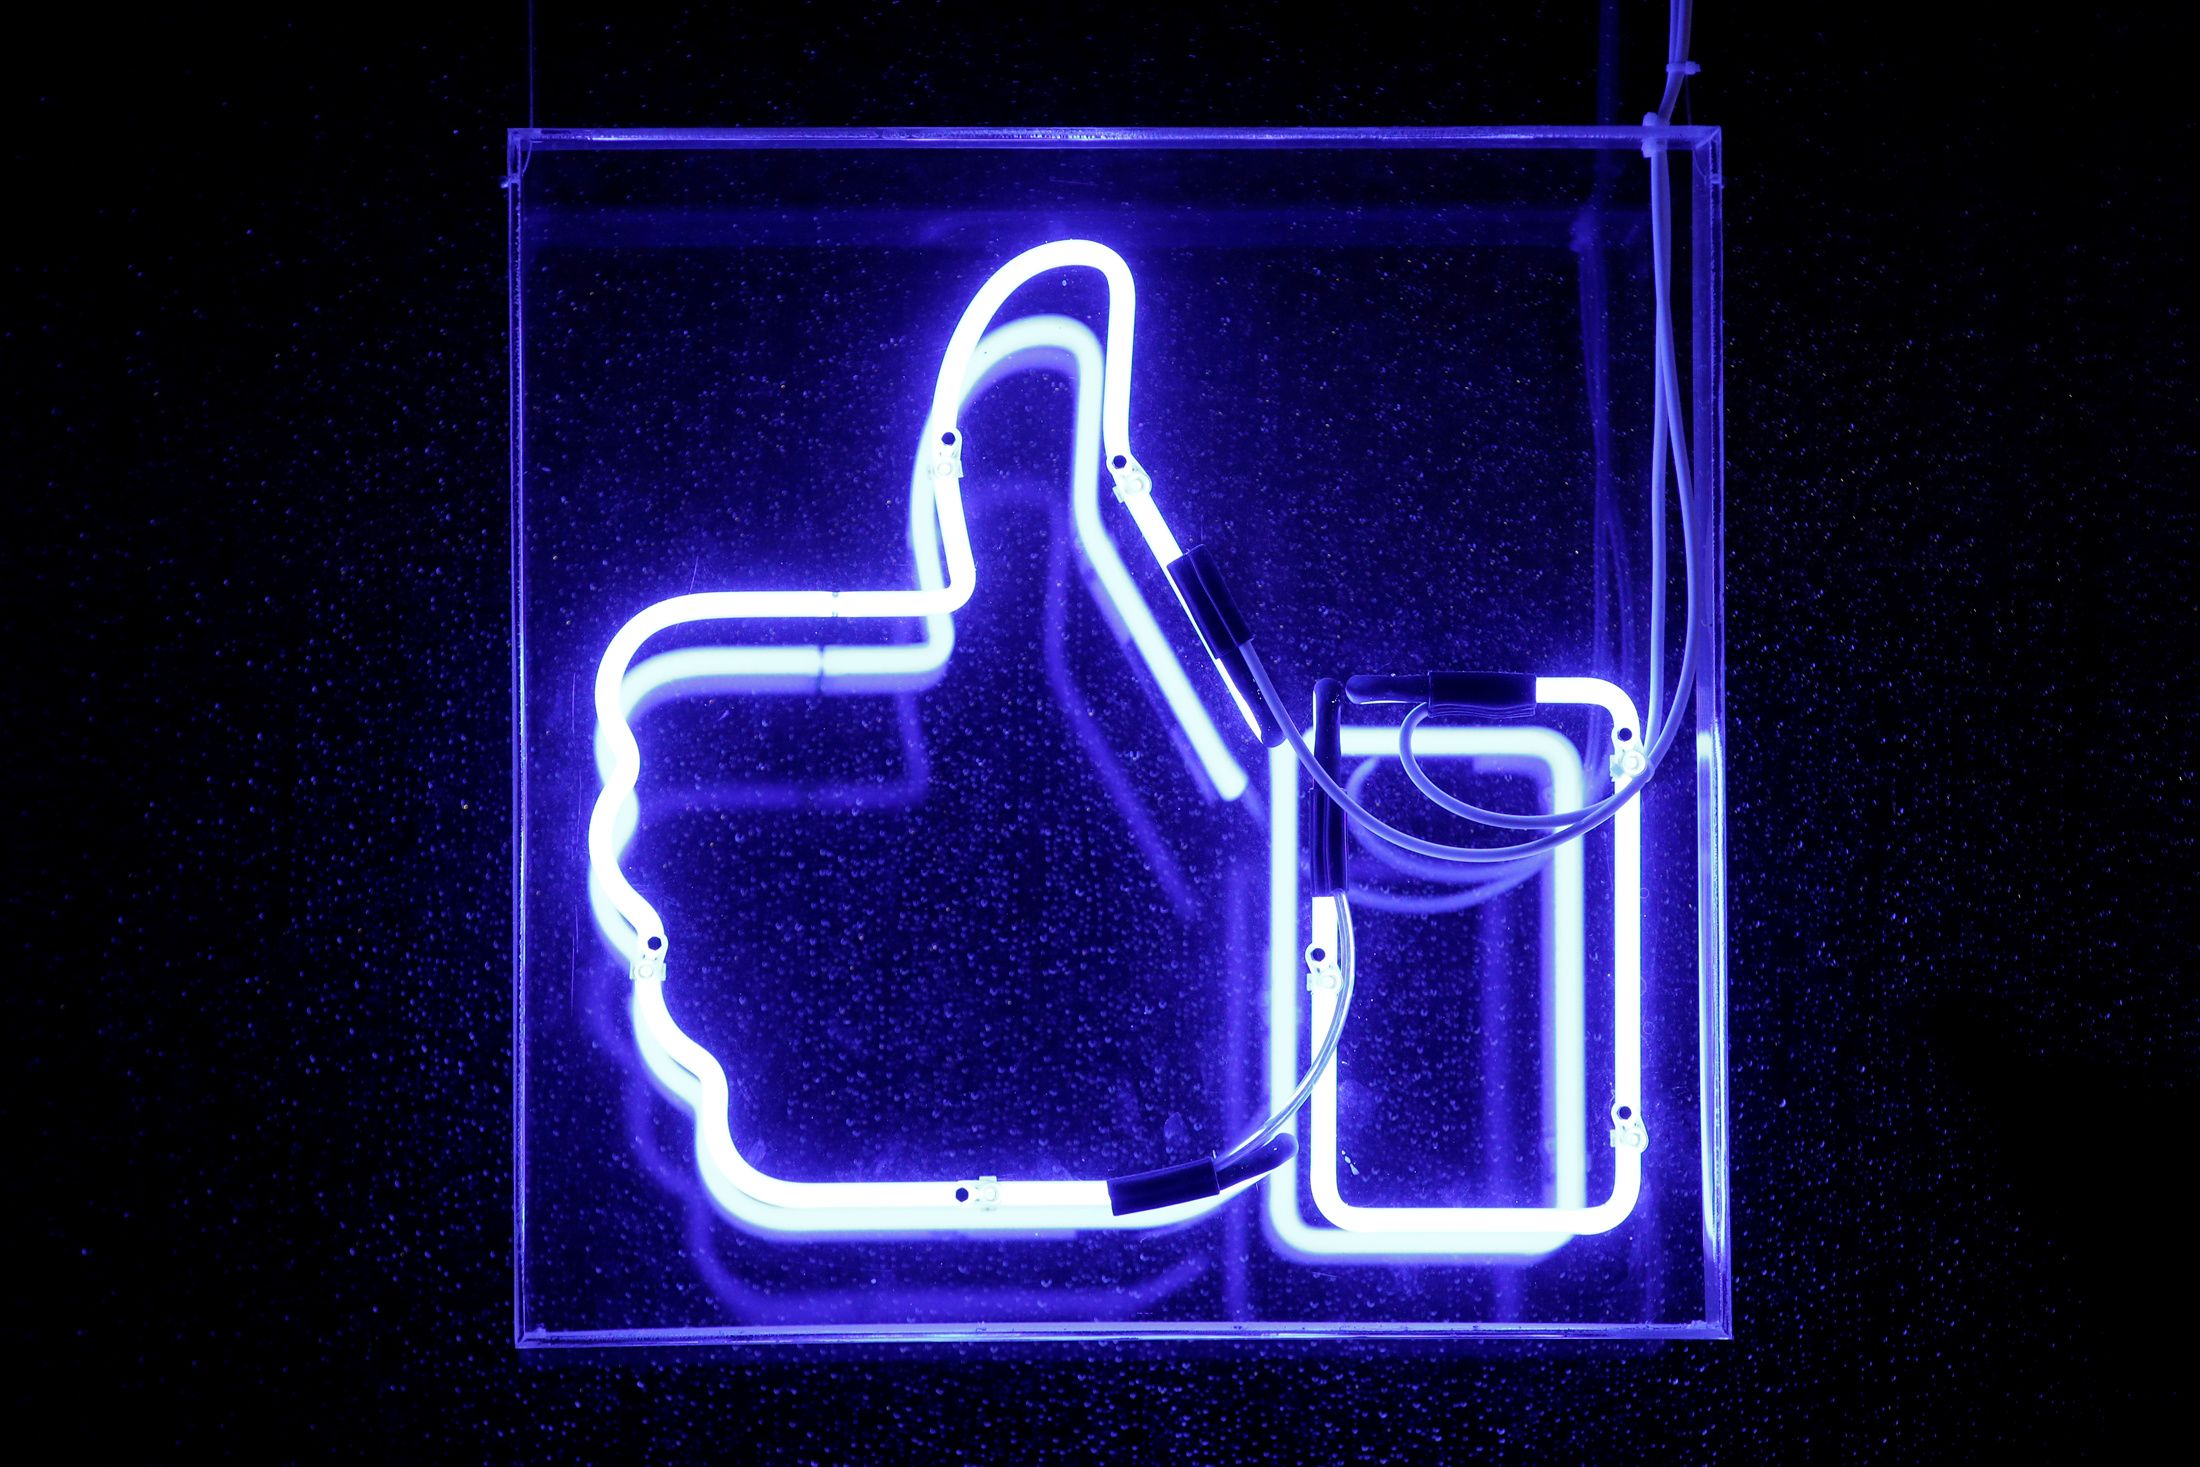 Facebook's like button makes websites liable, top EU court rules